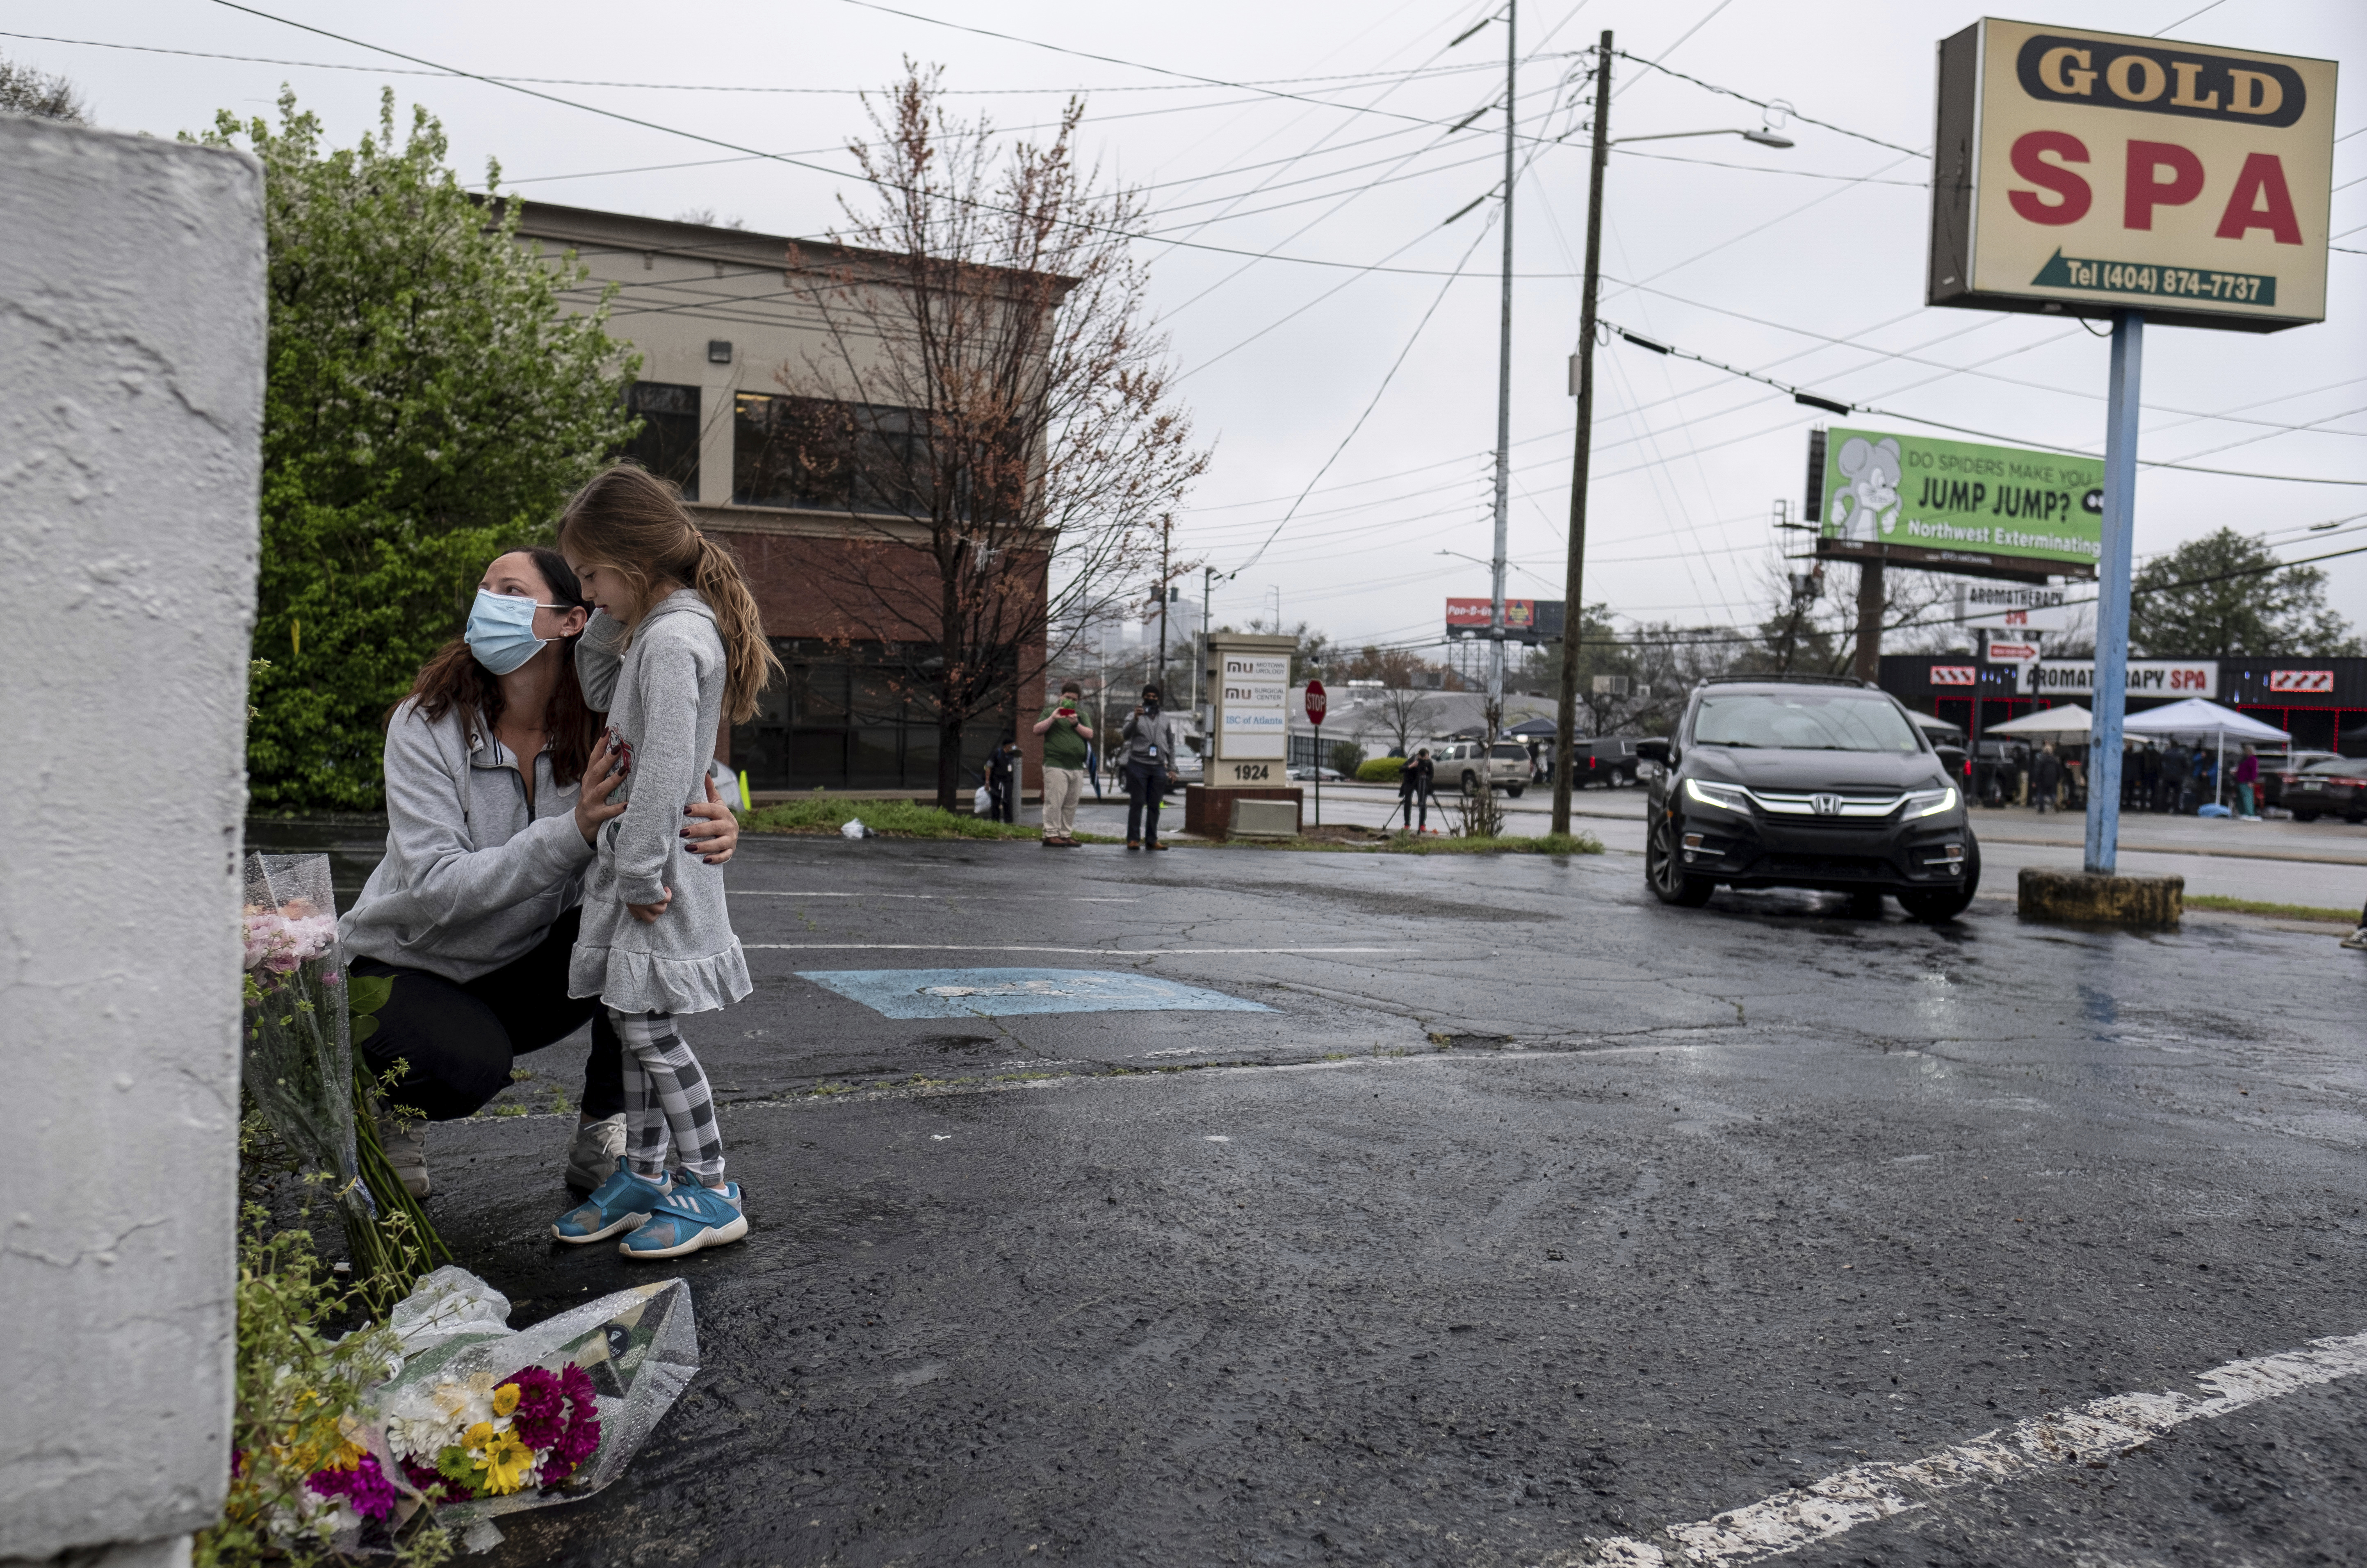 Mallory Rahman and her daughter Zara Rahman, 4, bring flowers to the Gold Spa in Atlanta on Wednesday, the day after eight people were killed at three massage spas in the Atlanta area. Authorities have arrested Robert Aaron Long, 21, in the shootings in Atlanta and Cherokee County, Ga. CREDIT: Ben Gray/AP